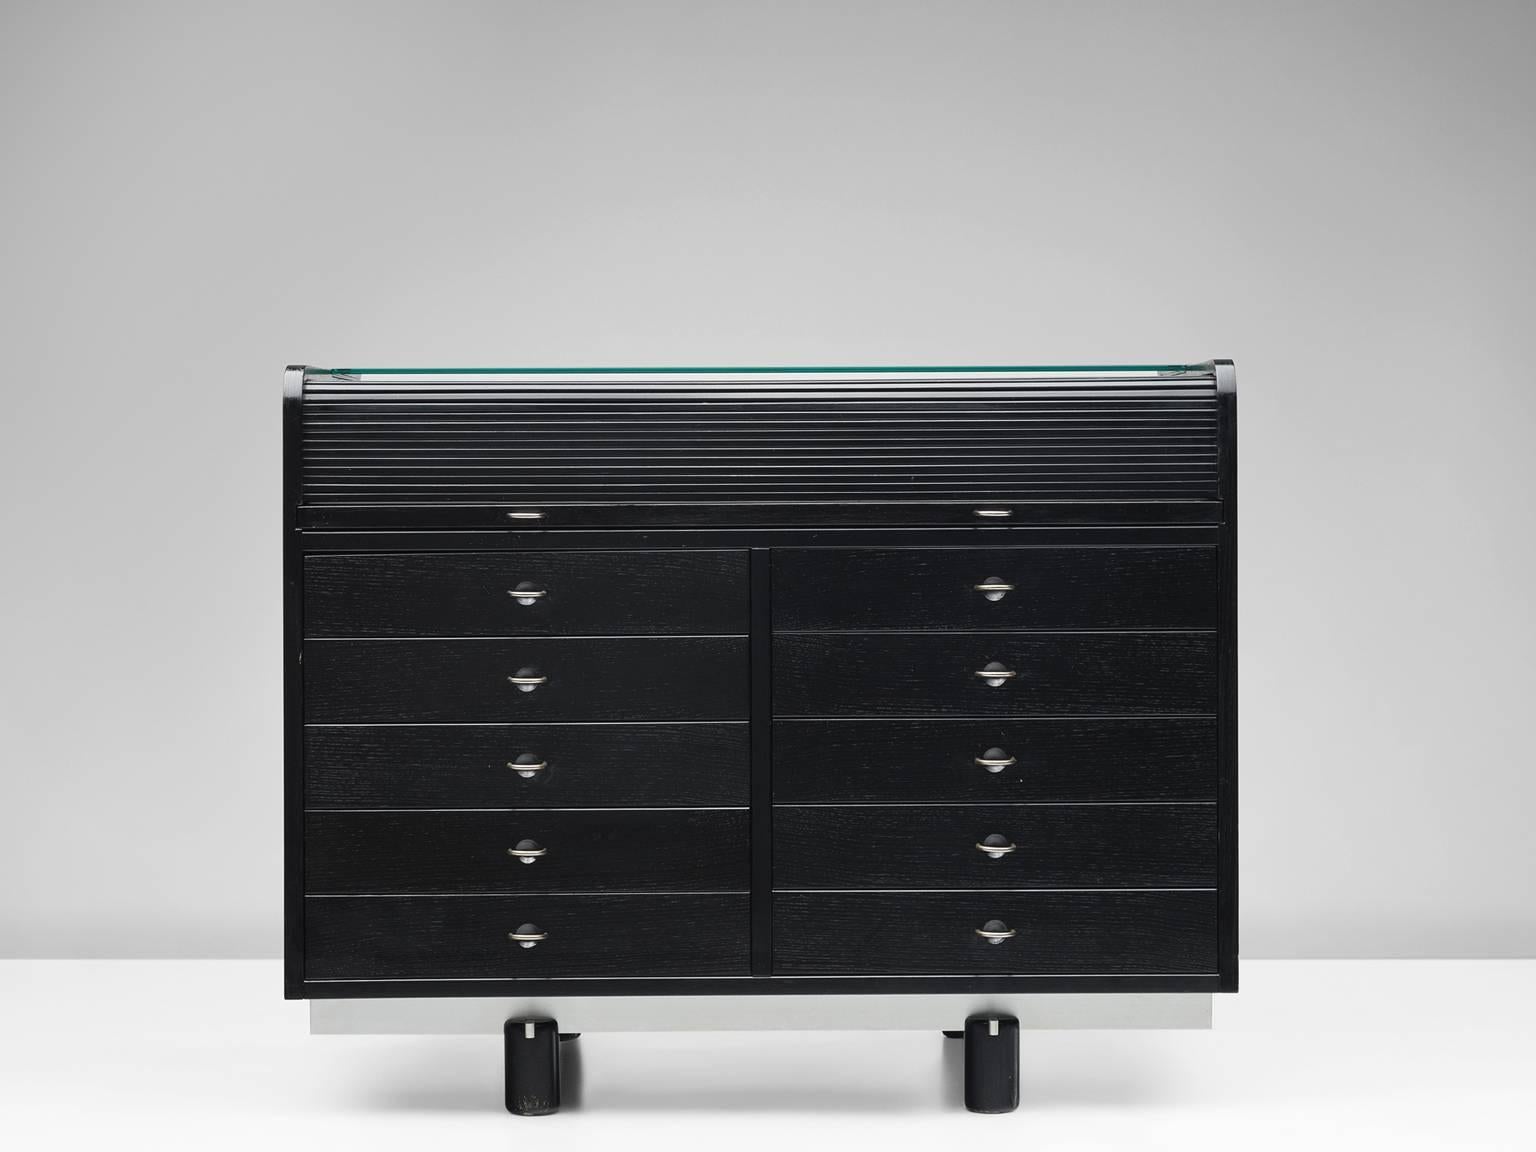 Desk and cabinet by Gianfranco Frattini for Bernini, lacquered wood, crystal, suede, Italy, 1960s. 

This black writing desk is designed by Gianfranco Frattini and made by Bernini. It is a rare to come across an original, black desk of this type.